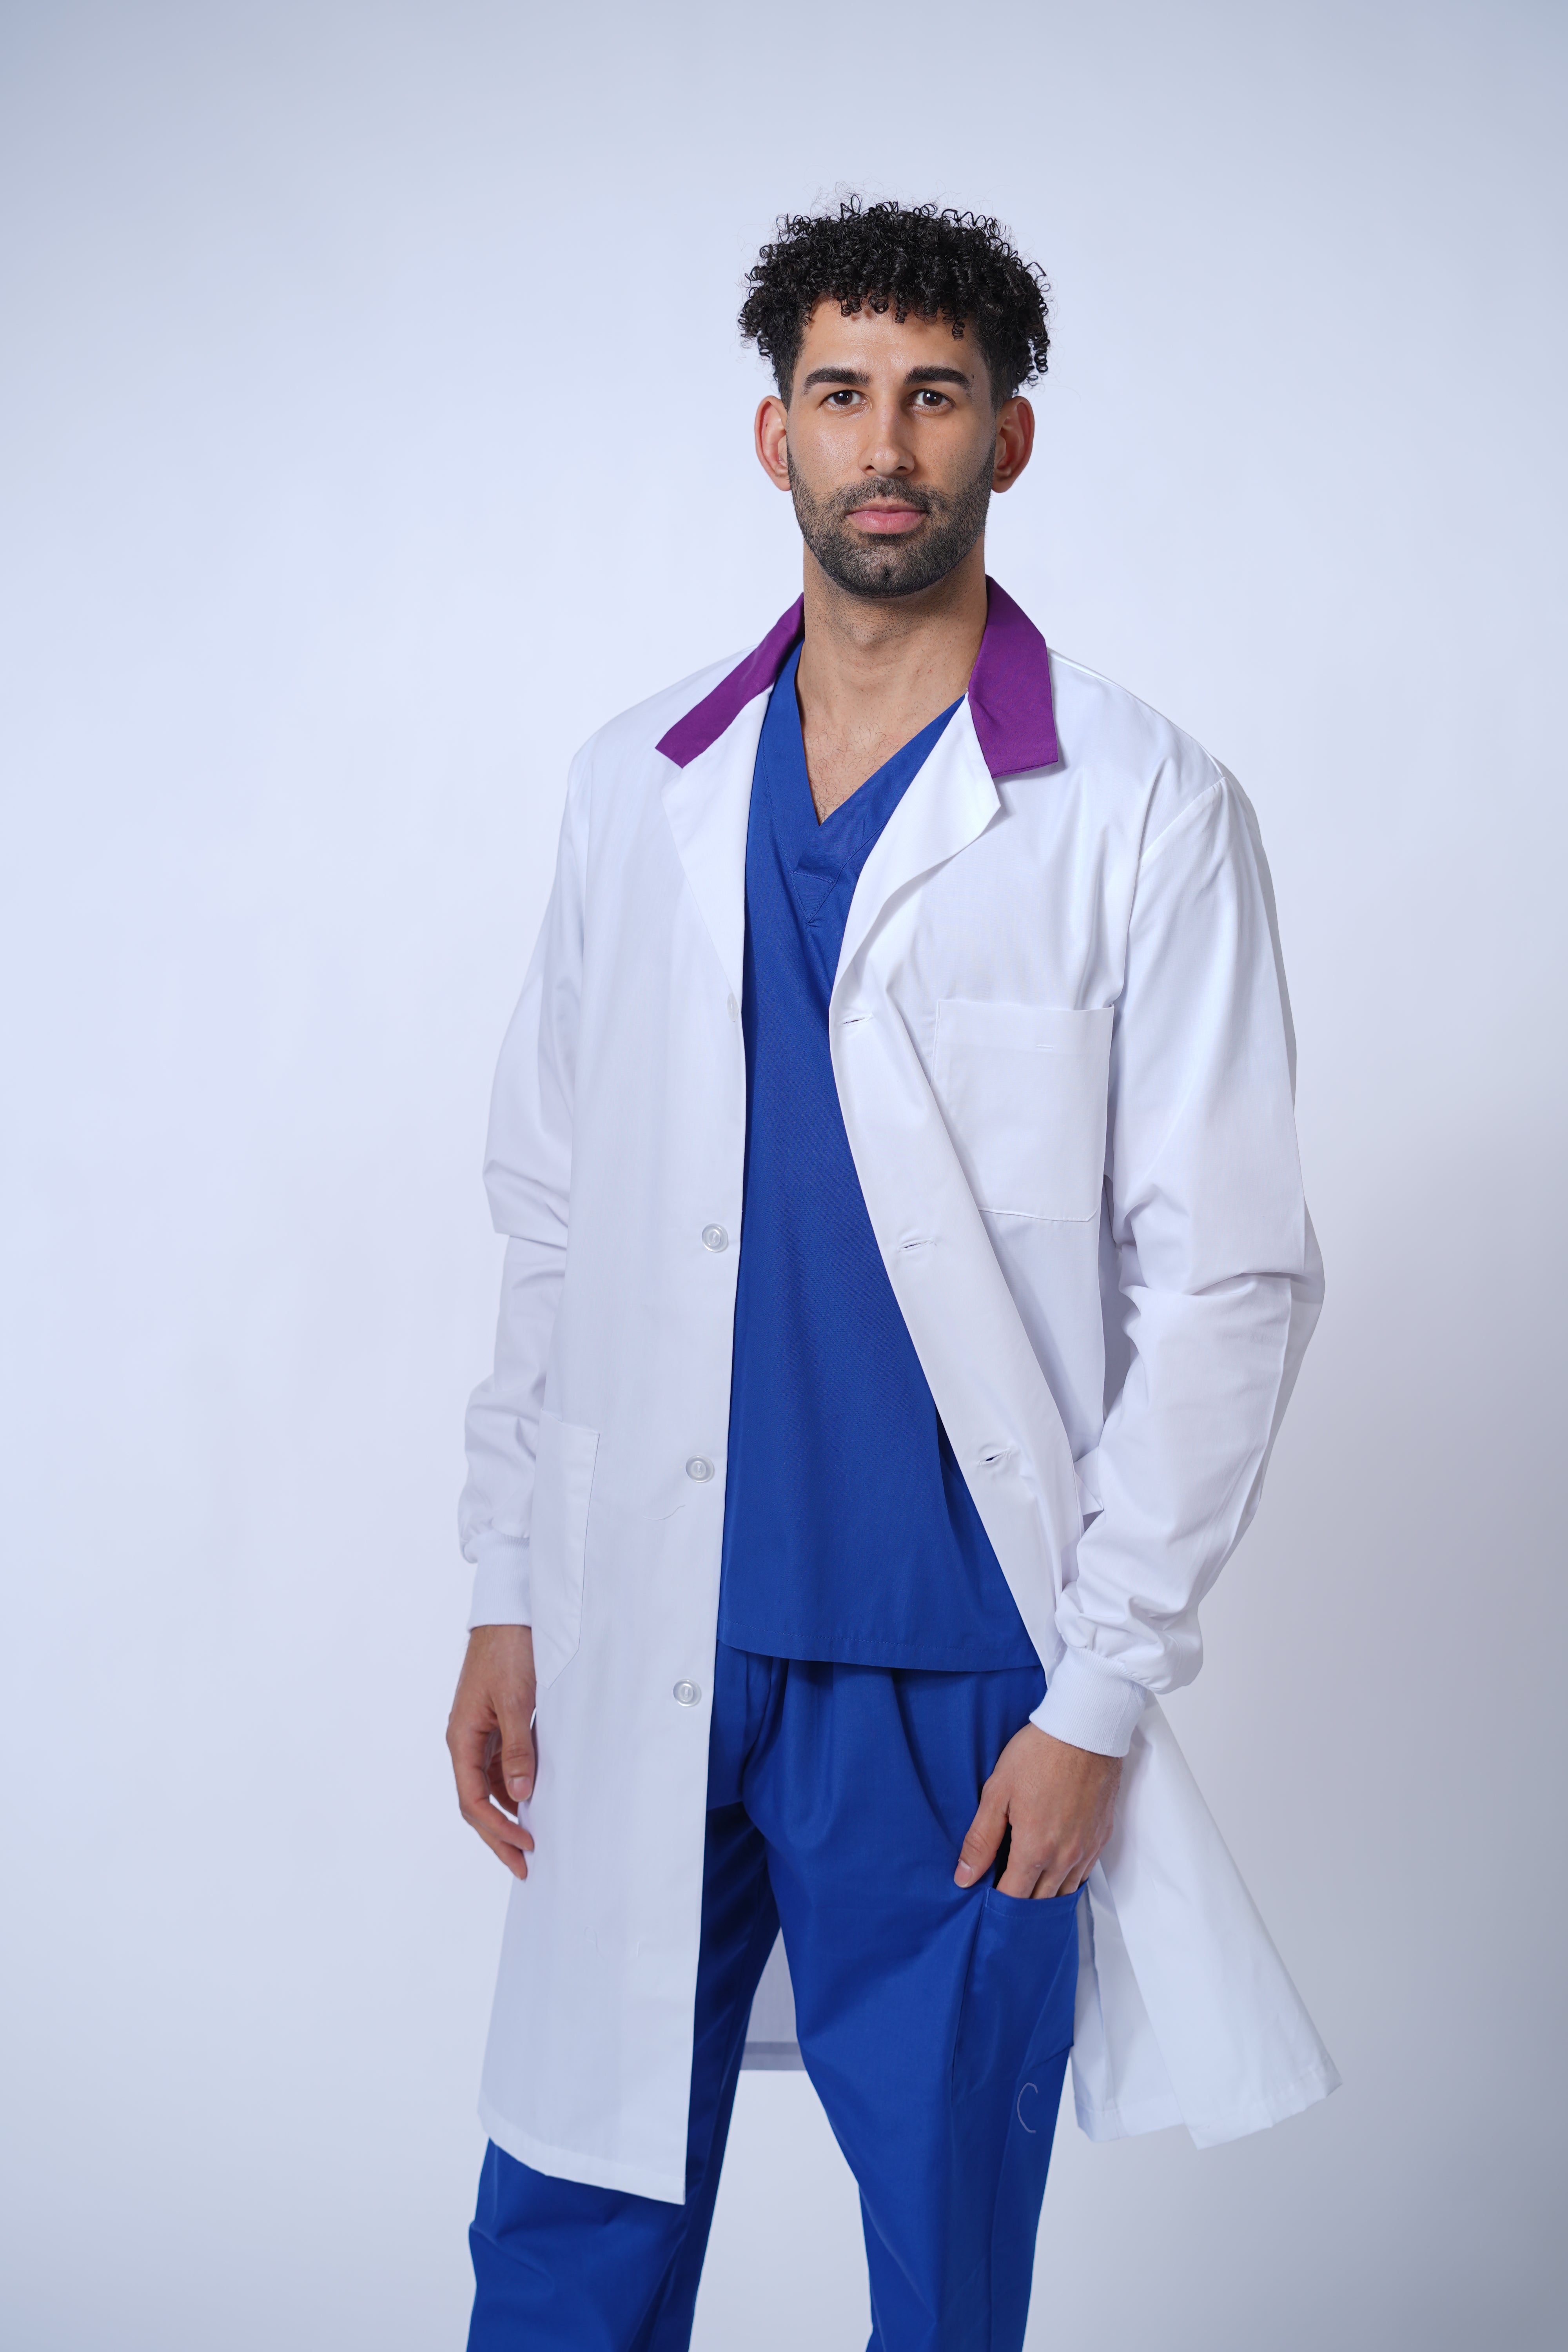 Unisex Lab Coats with Snaps / Buttons